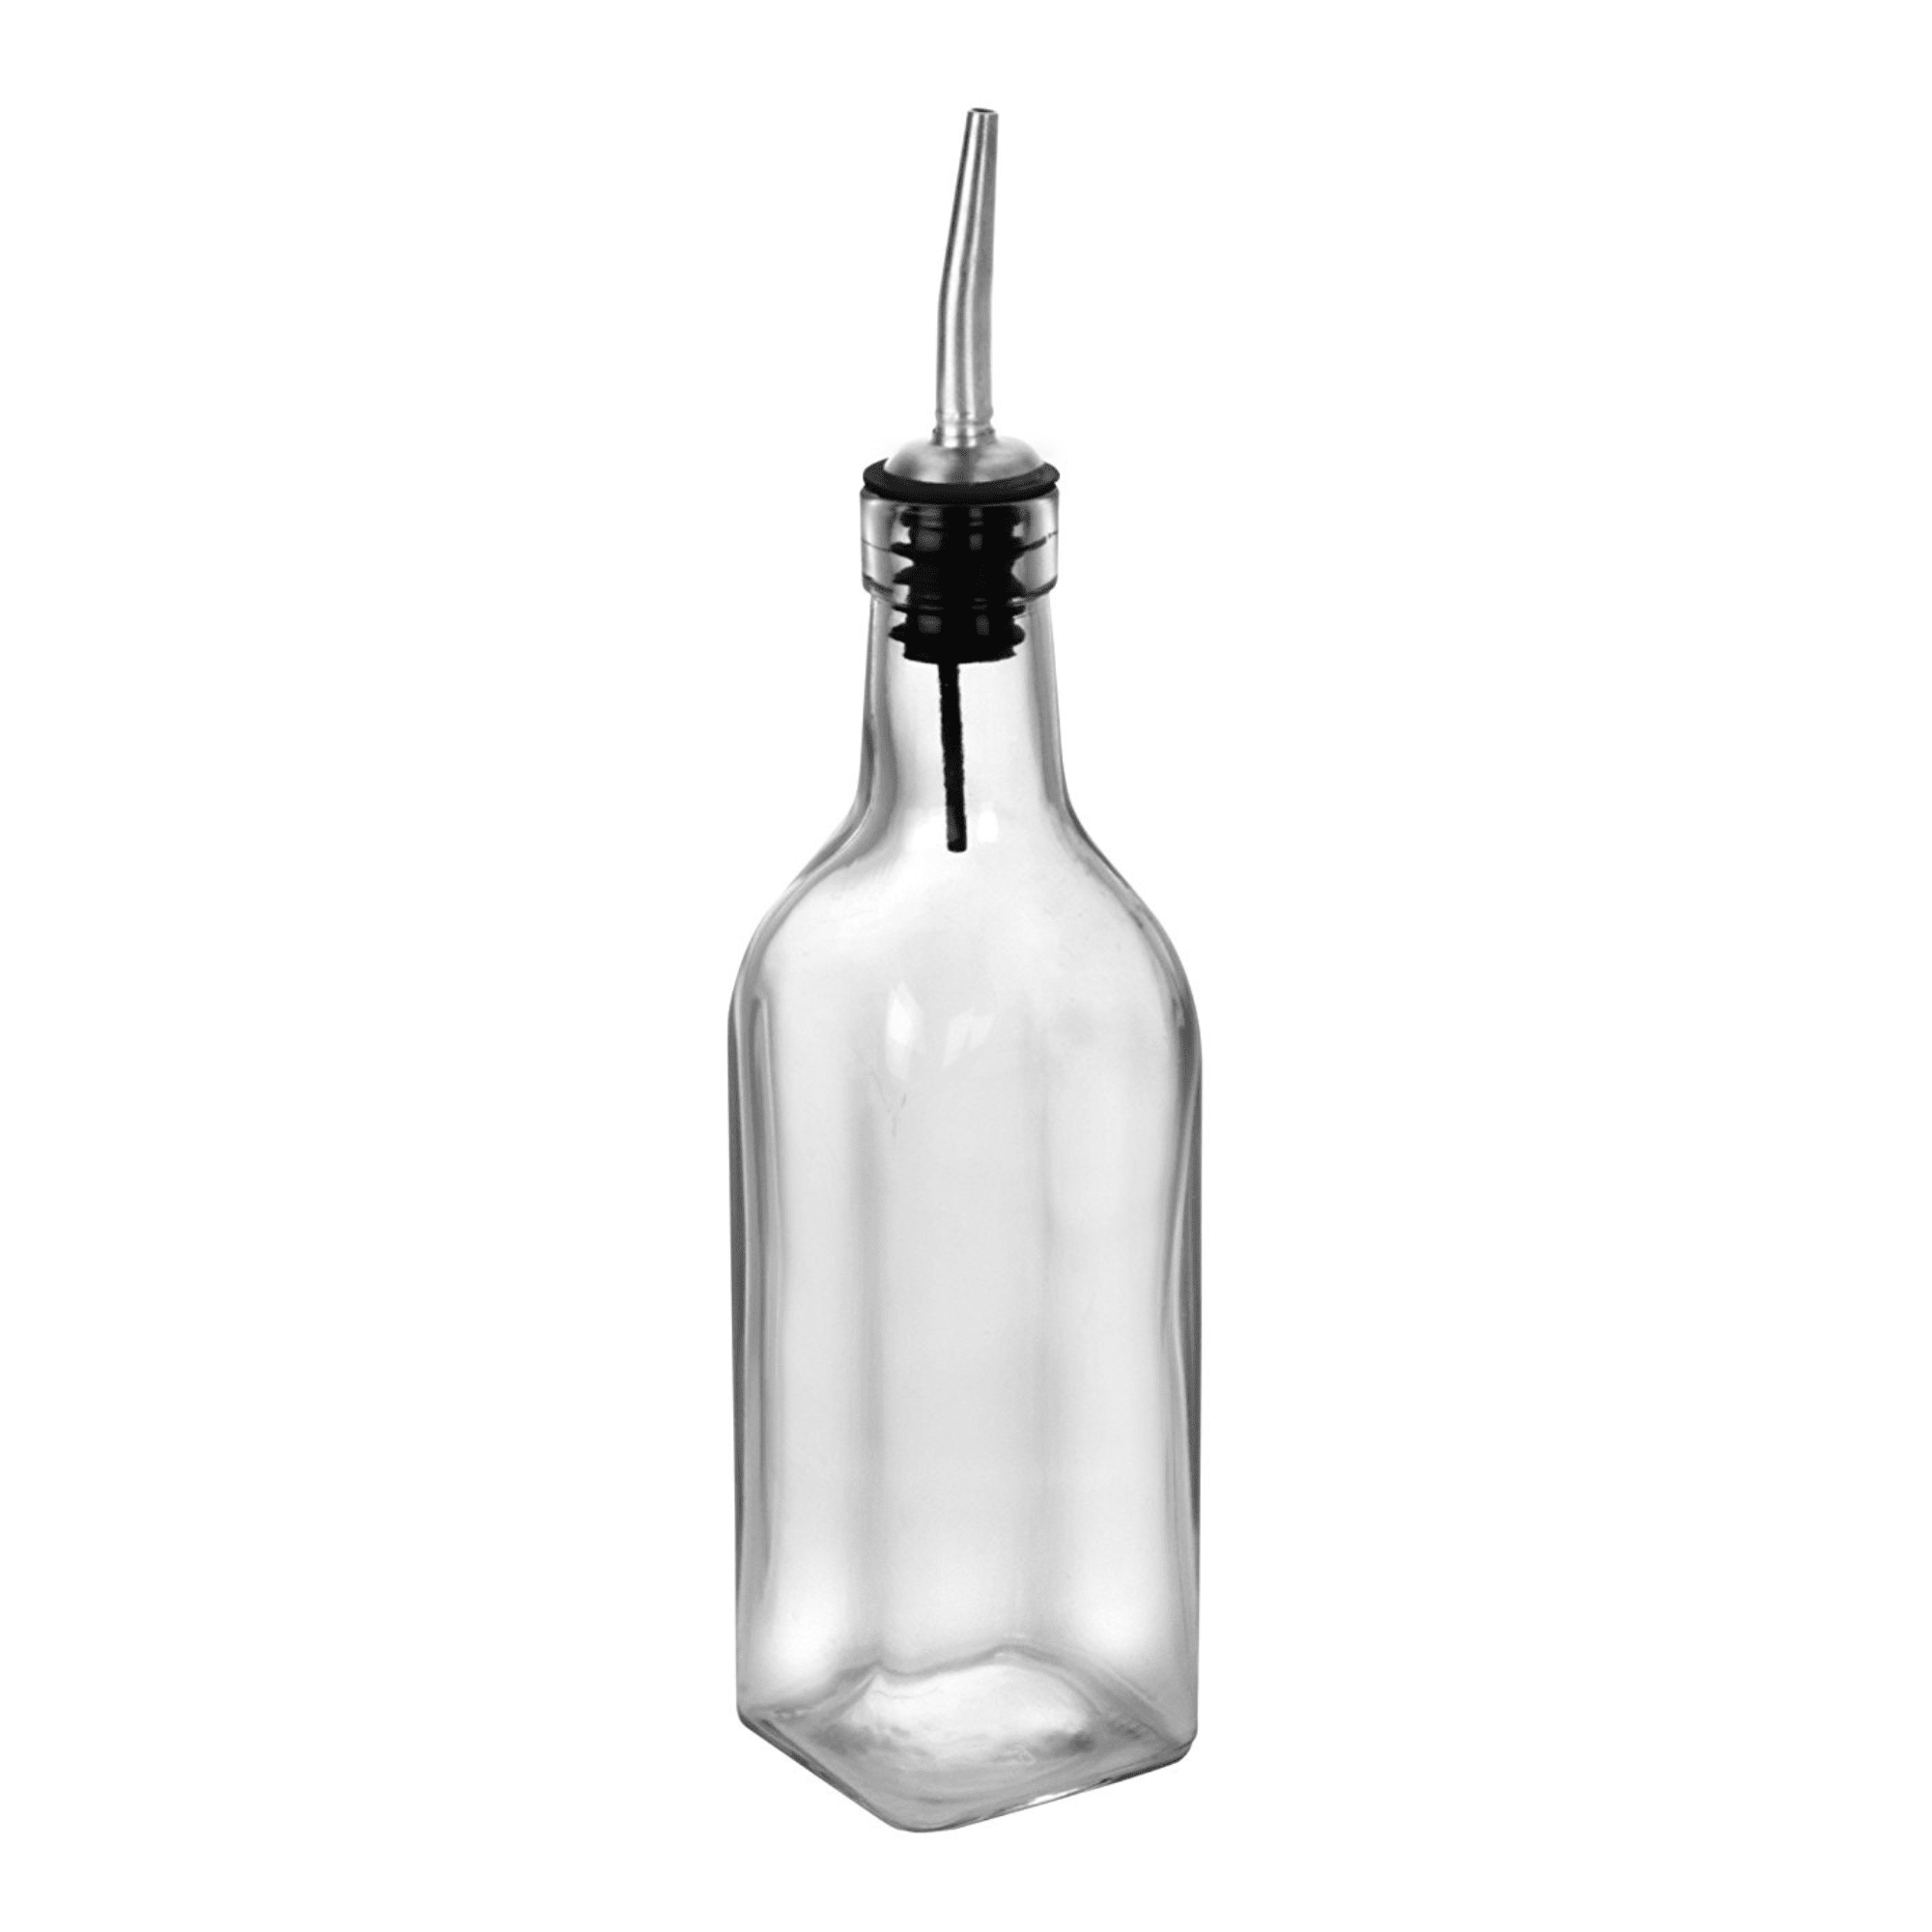 1pc Round Press-type Oil Bottle With Non-drip Spout For Seasoning